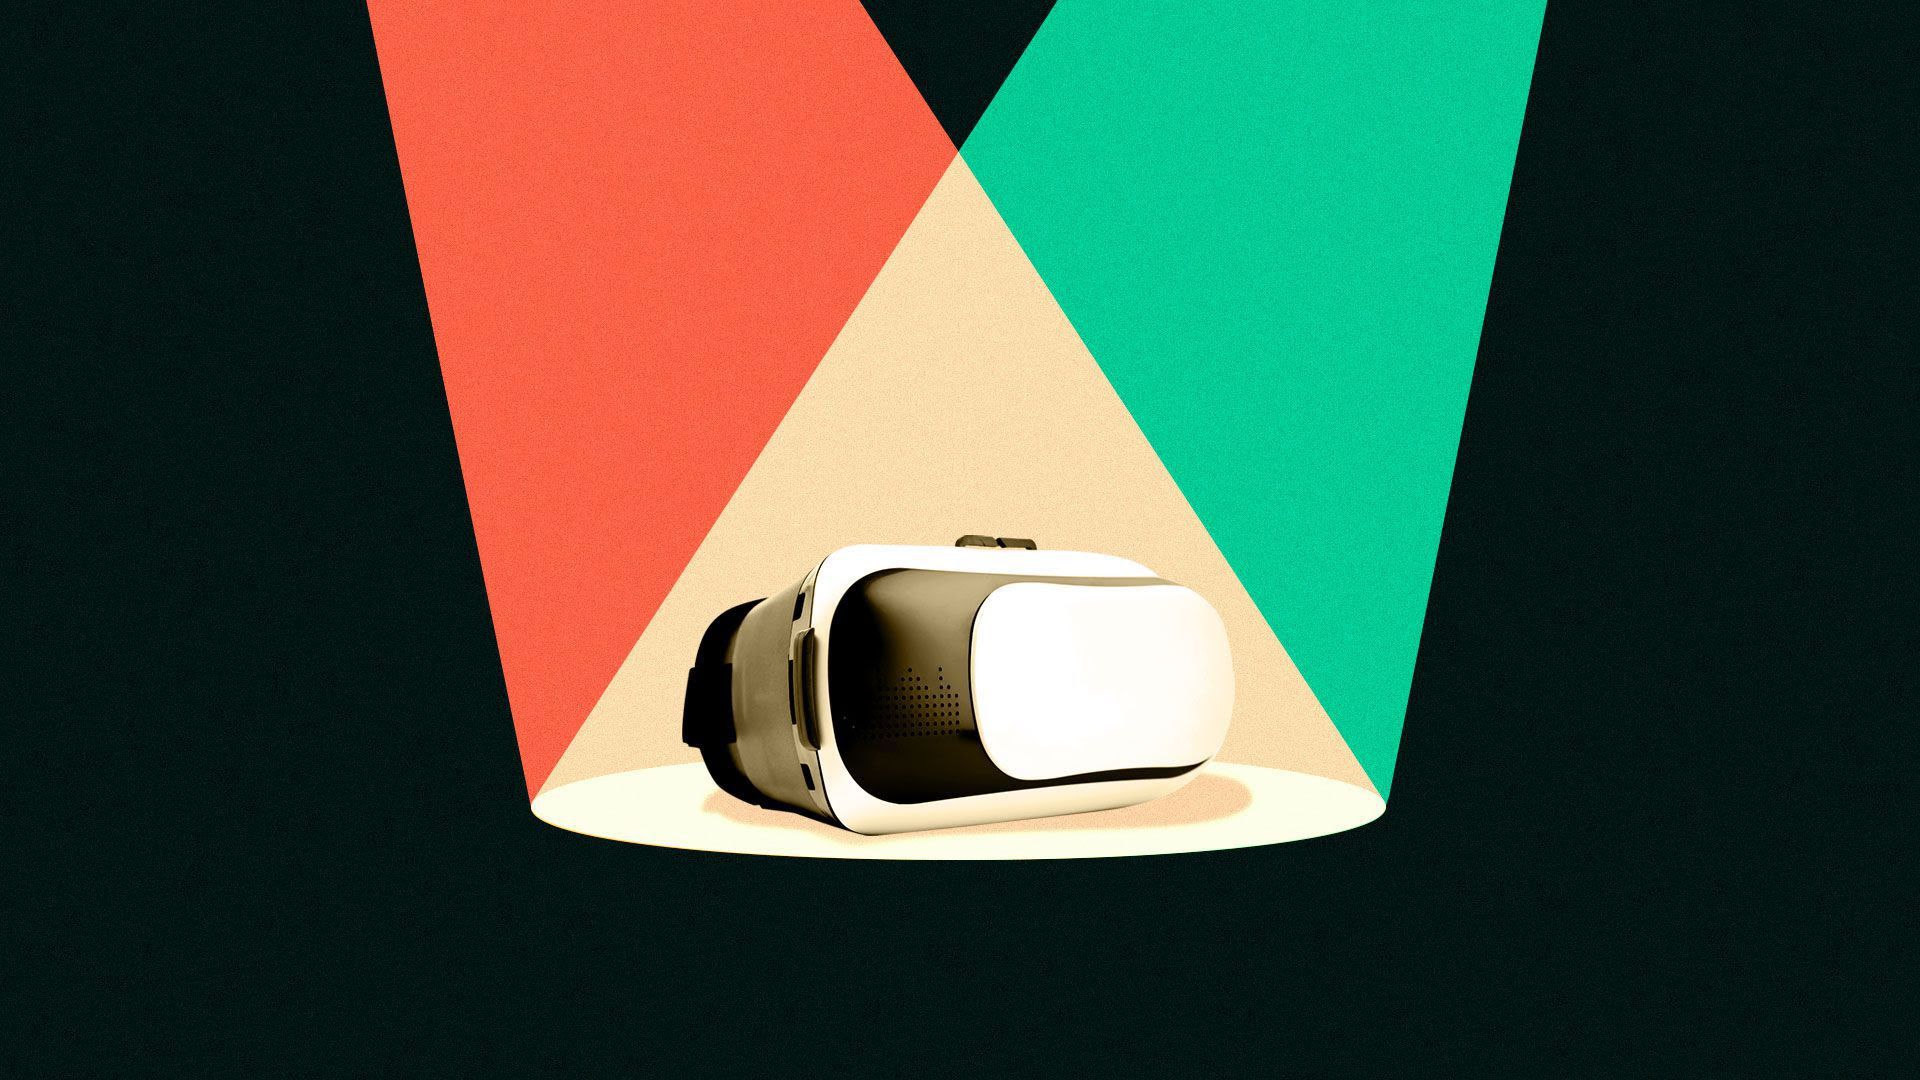 An illustration of lights shining on a VR headset.